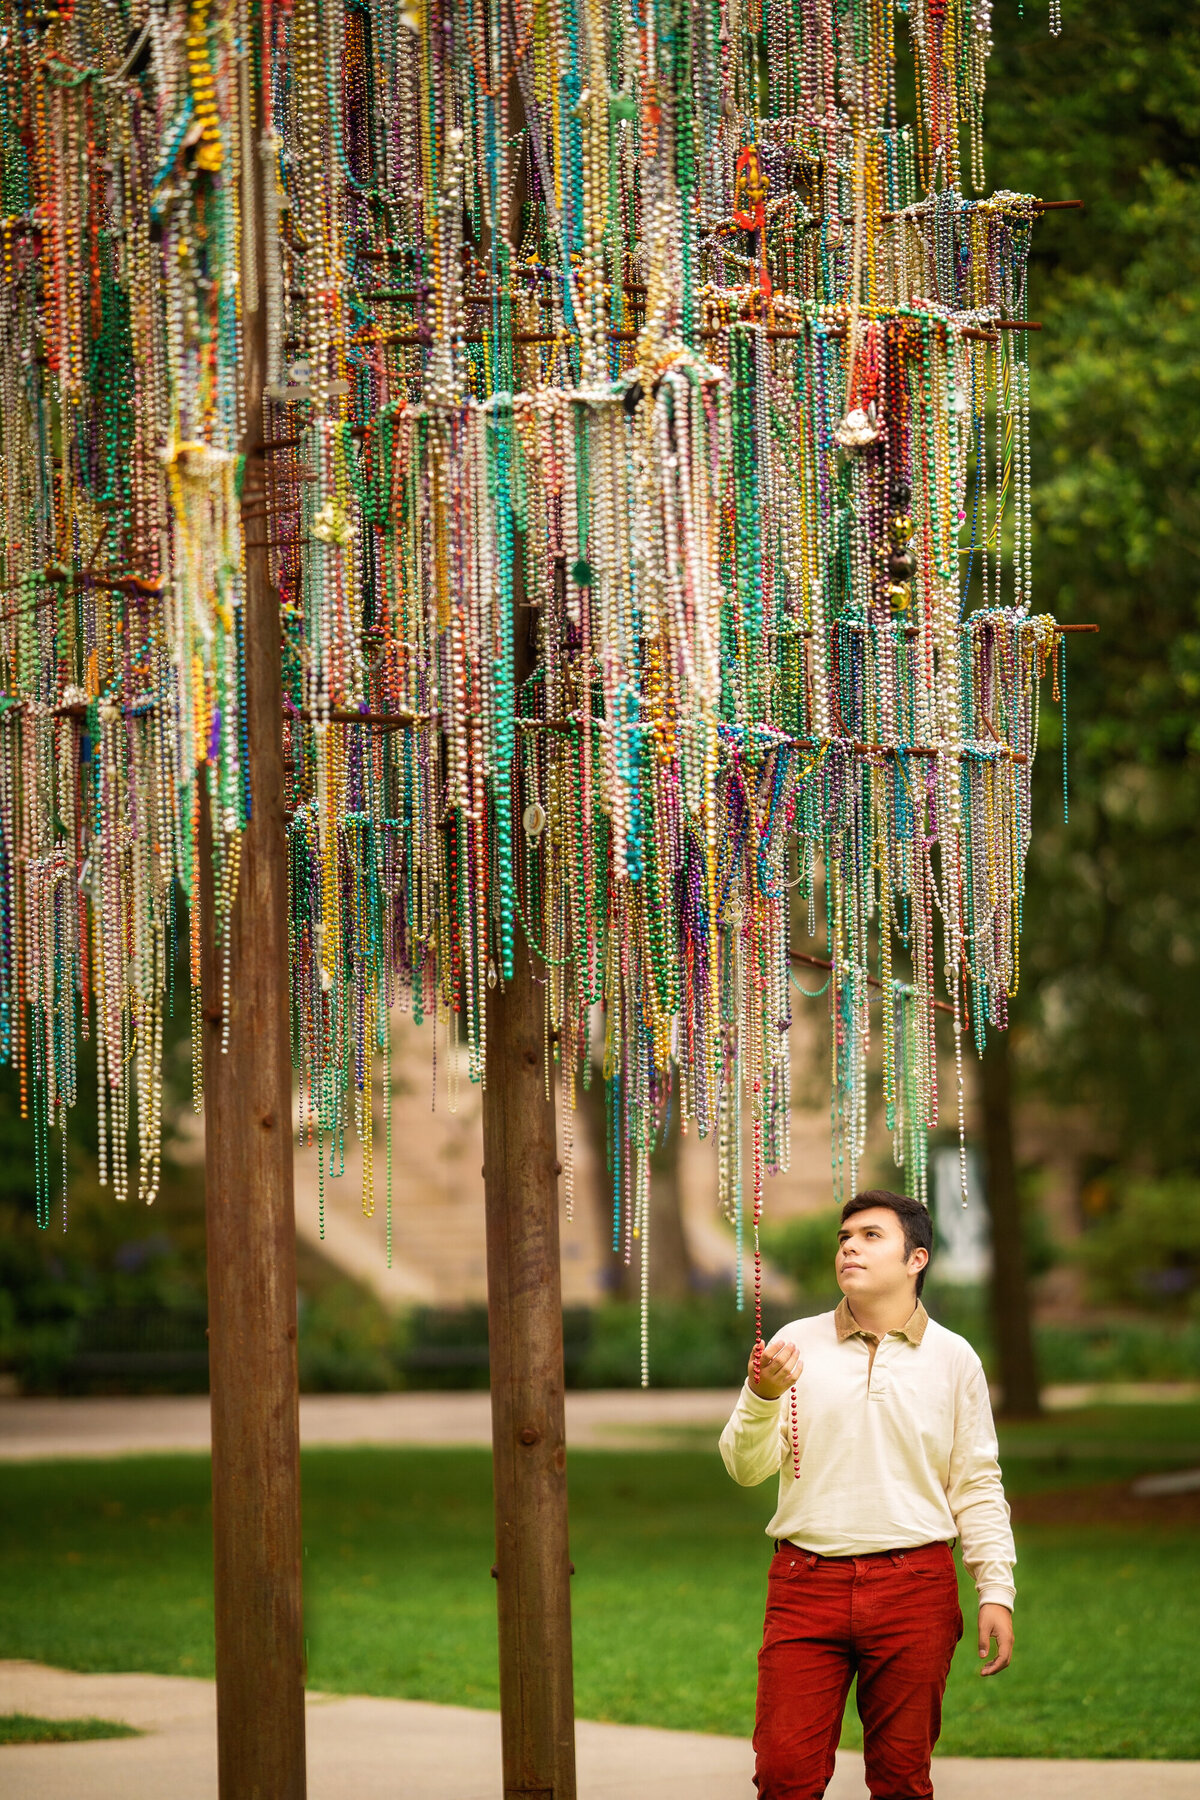 Hispanic male standing under a bead tree on the campus of Tulane University.  He is wearing red pants and a cream colored shirt.  He has short brown hair.  He is holding one of the beads and looking up at the tree.